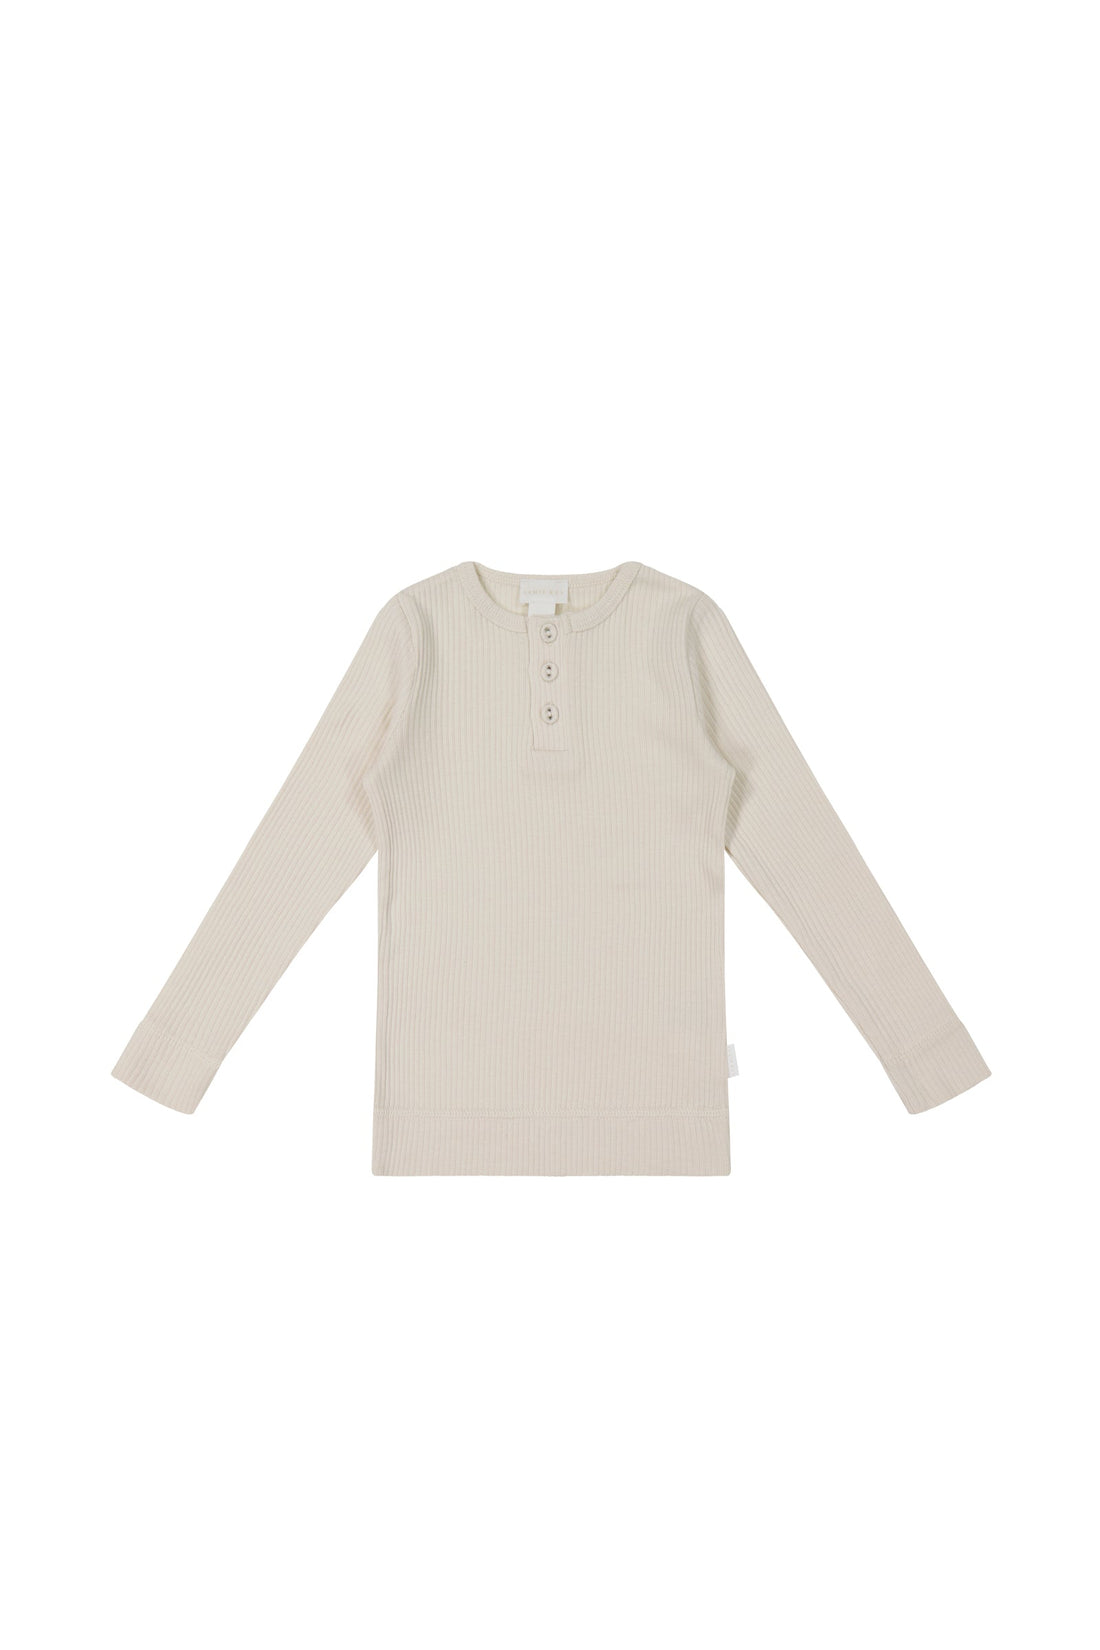 Organic Cotton Modal Long Sleeve Henley - Swan Childrens Top from Jamie Kay USA